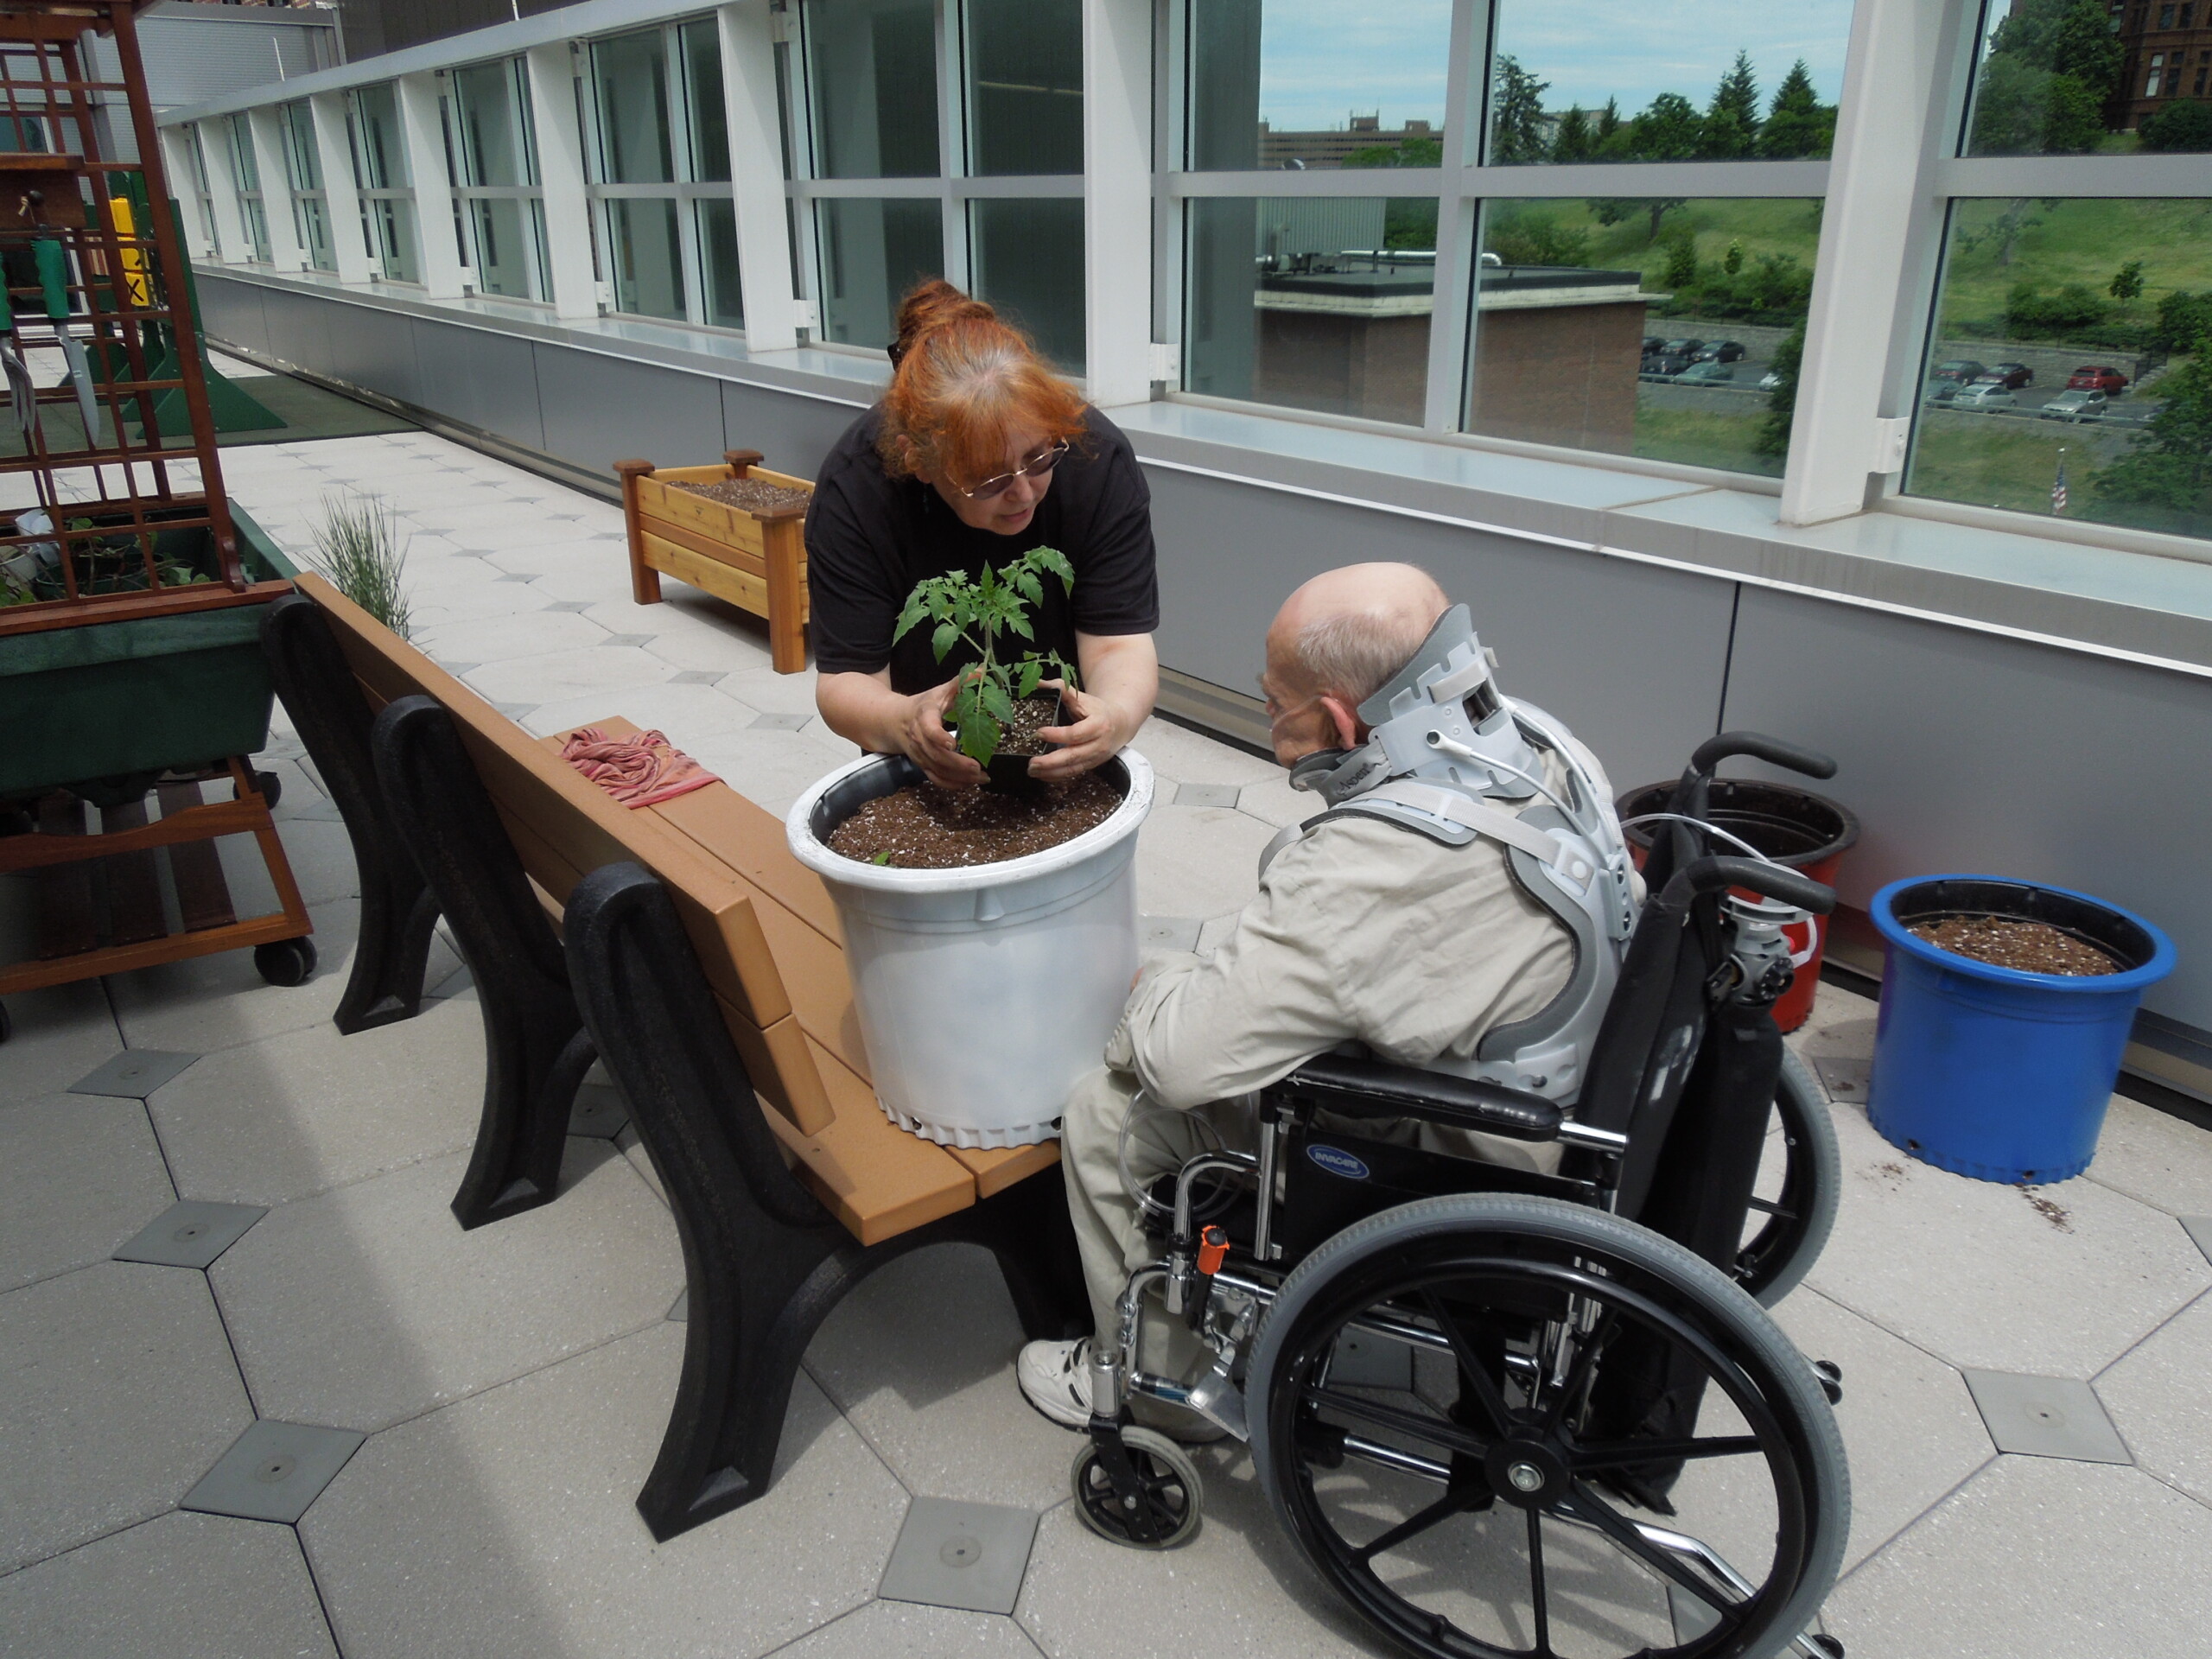 Dr. Lee Newman with a veteral in a wheelchair. She is showing him how to plant a tomato plant.